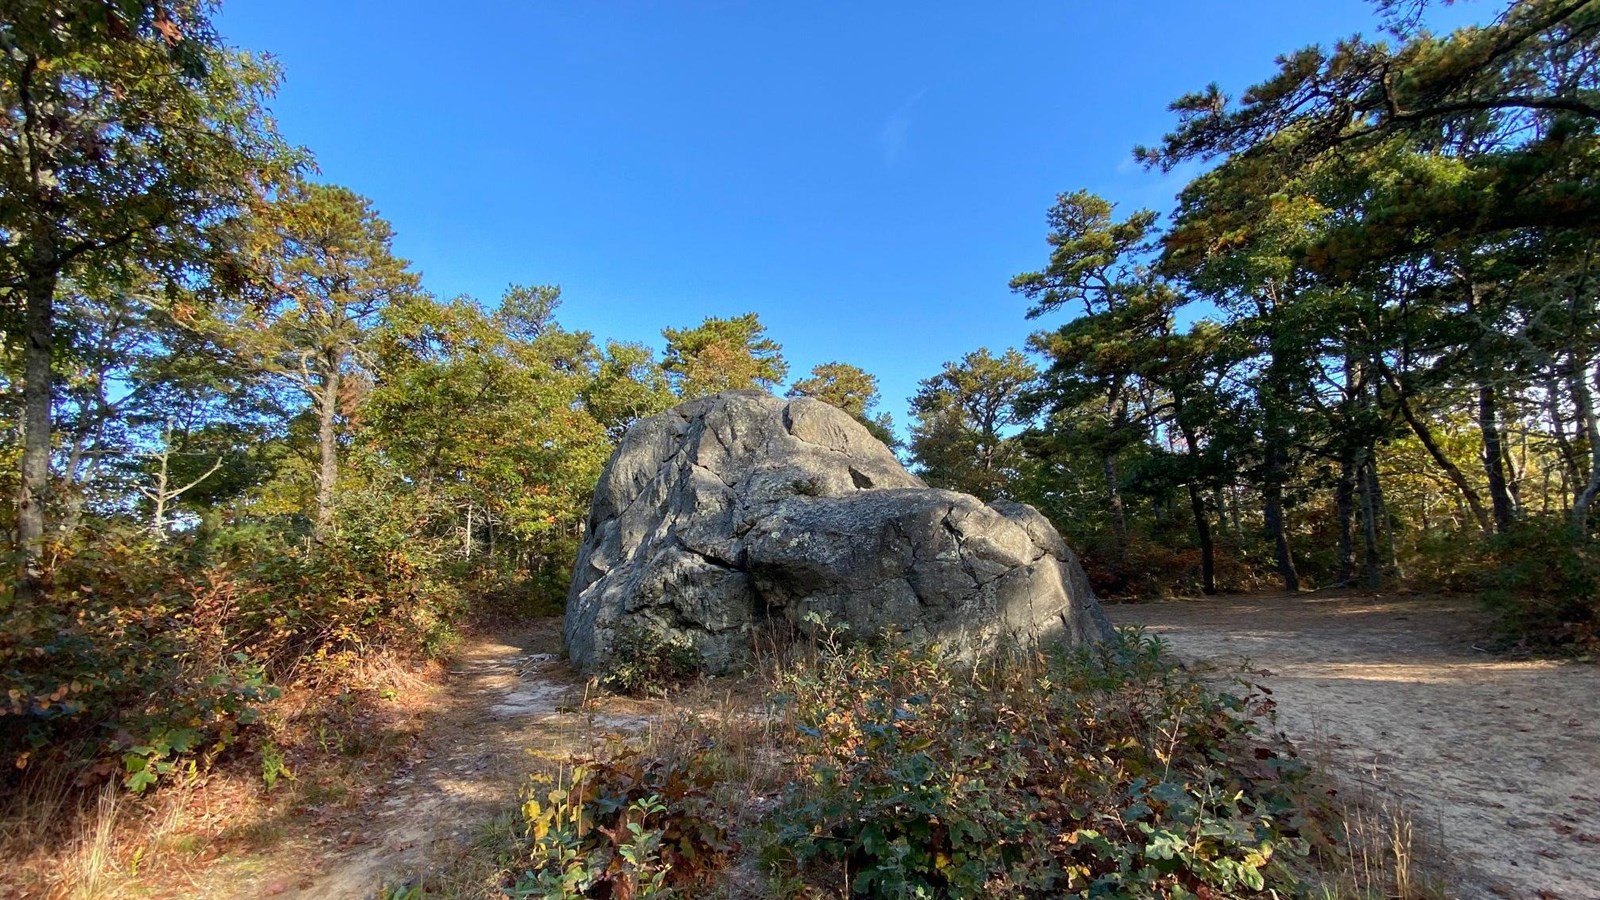 Image of Doane Rock surrounded by trees and blue sky.